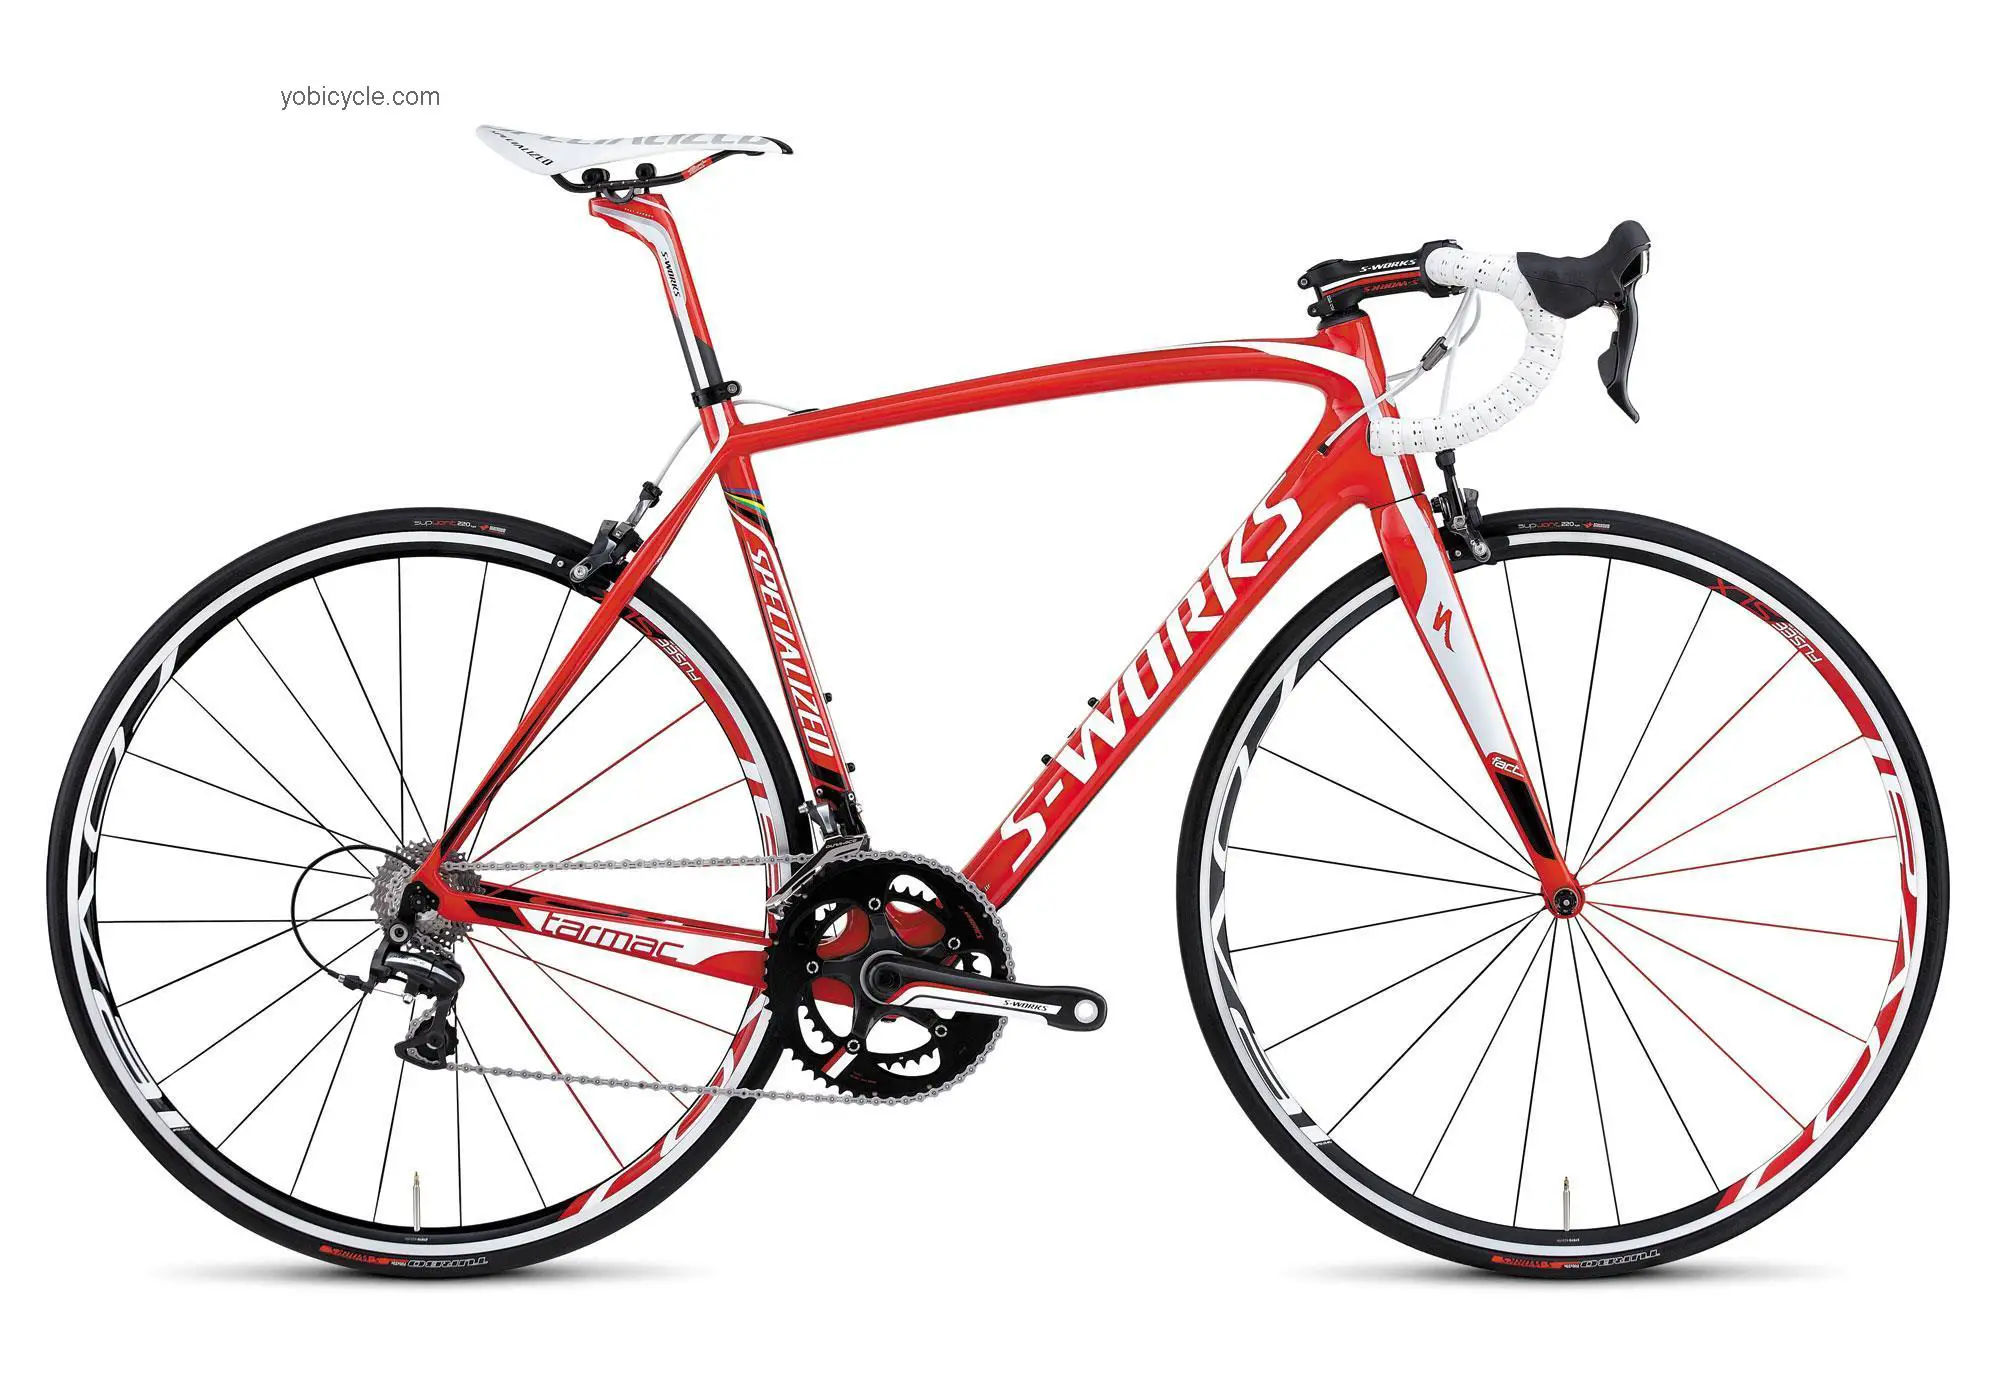 Specialized S-Works Tarmac SL4 Dura-Ace 2012 comparison online with competitors